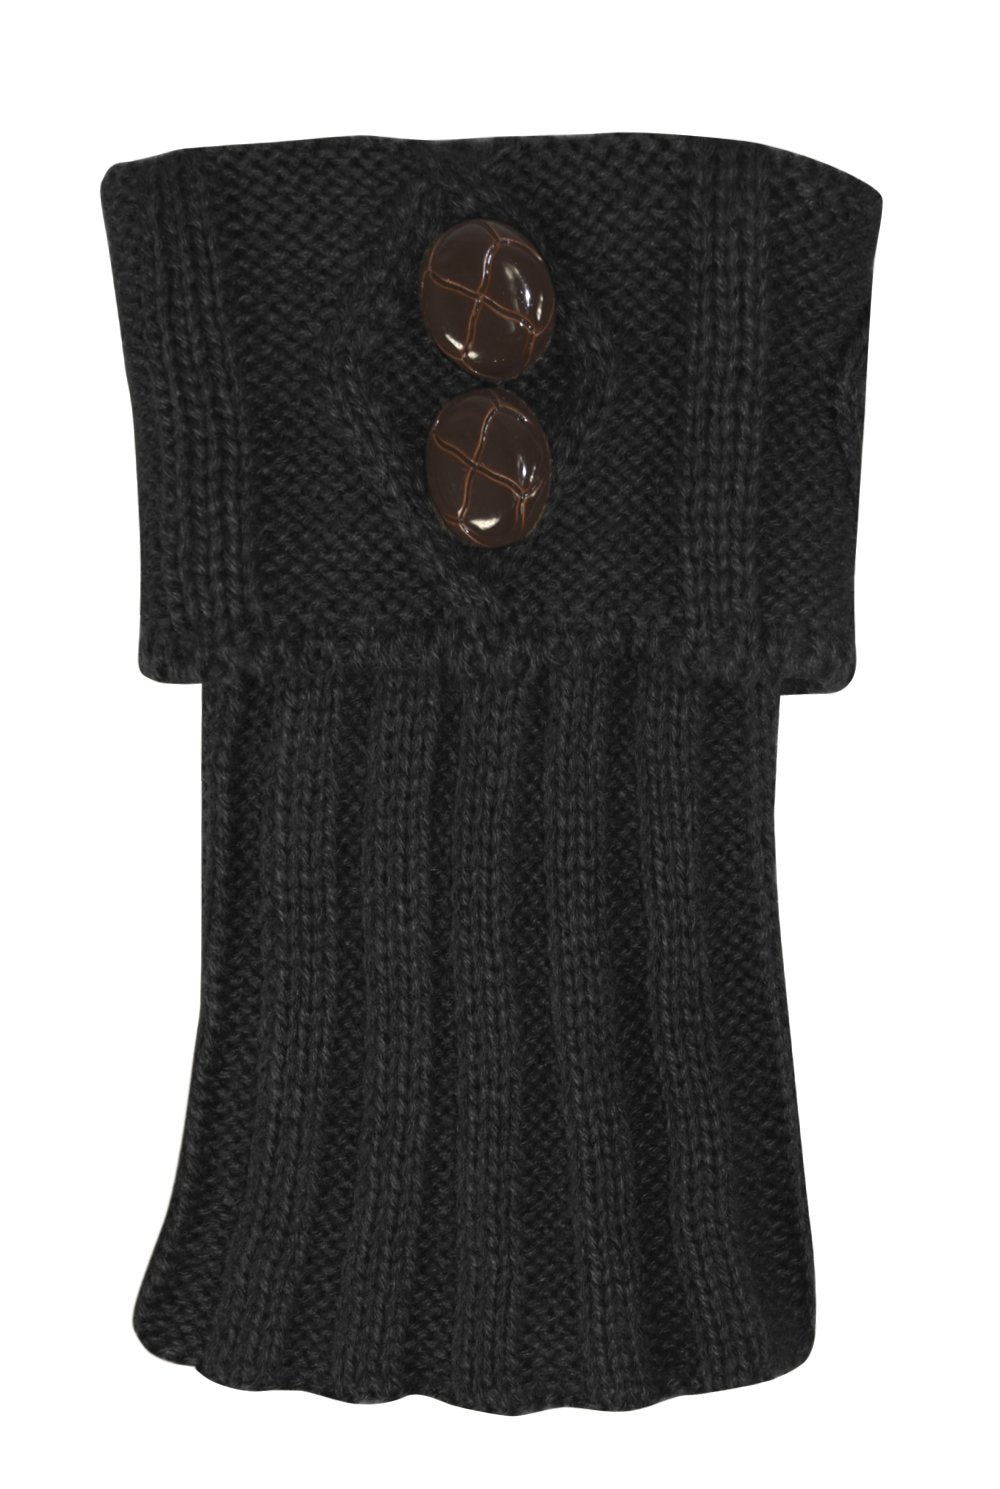 Cozy Soft Adjustable Knitted Winter Leg Warmers with Cute Buttons